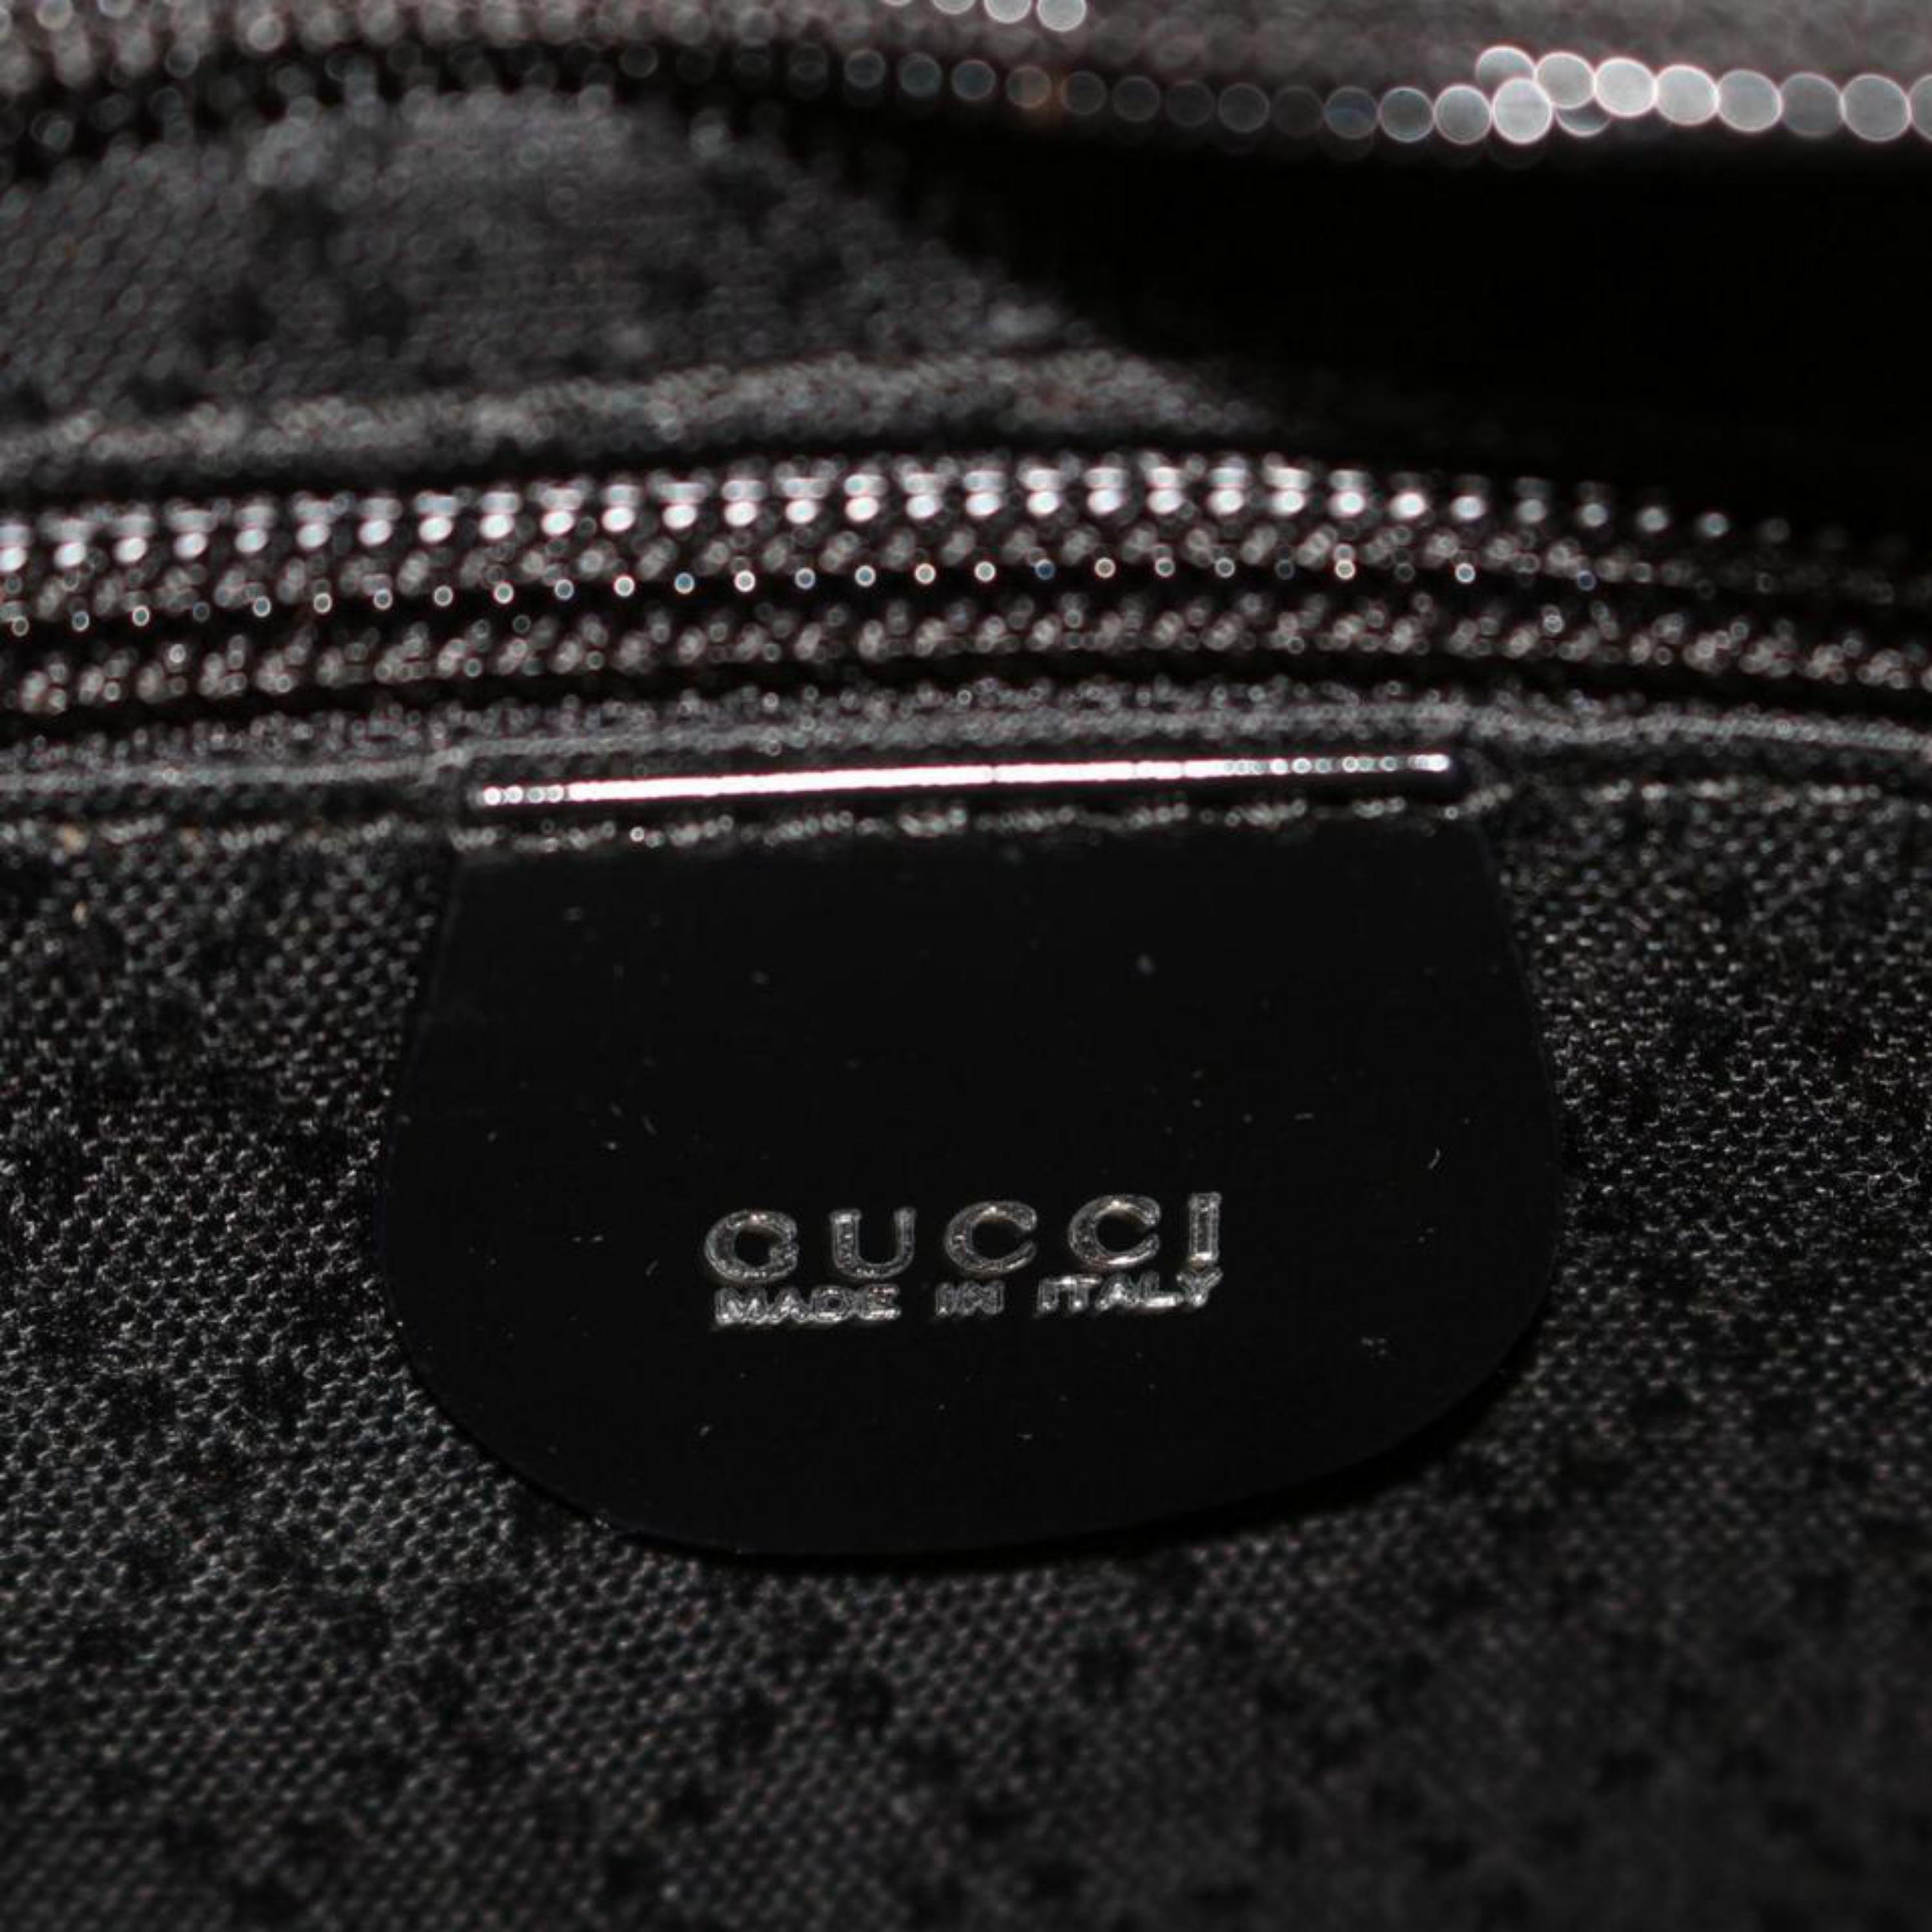 Gucci Rare Suitcase 867675 Black Canvas Weekend/Travel Bag For Sale 2